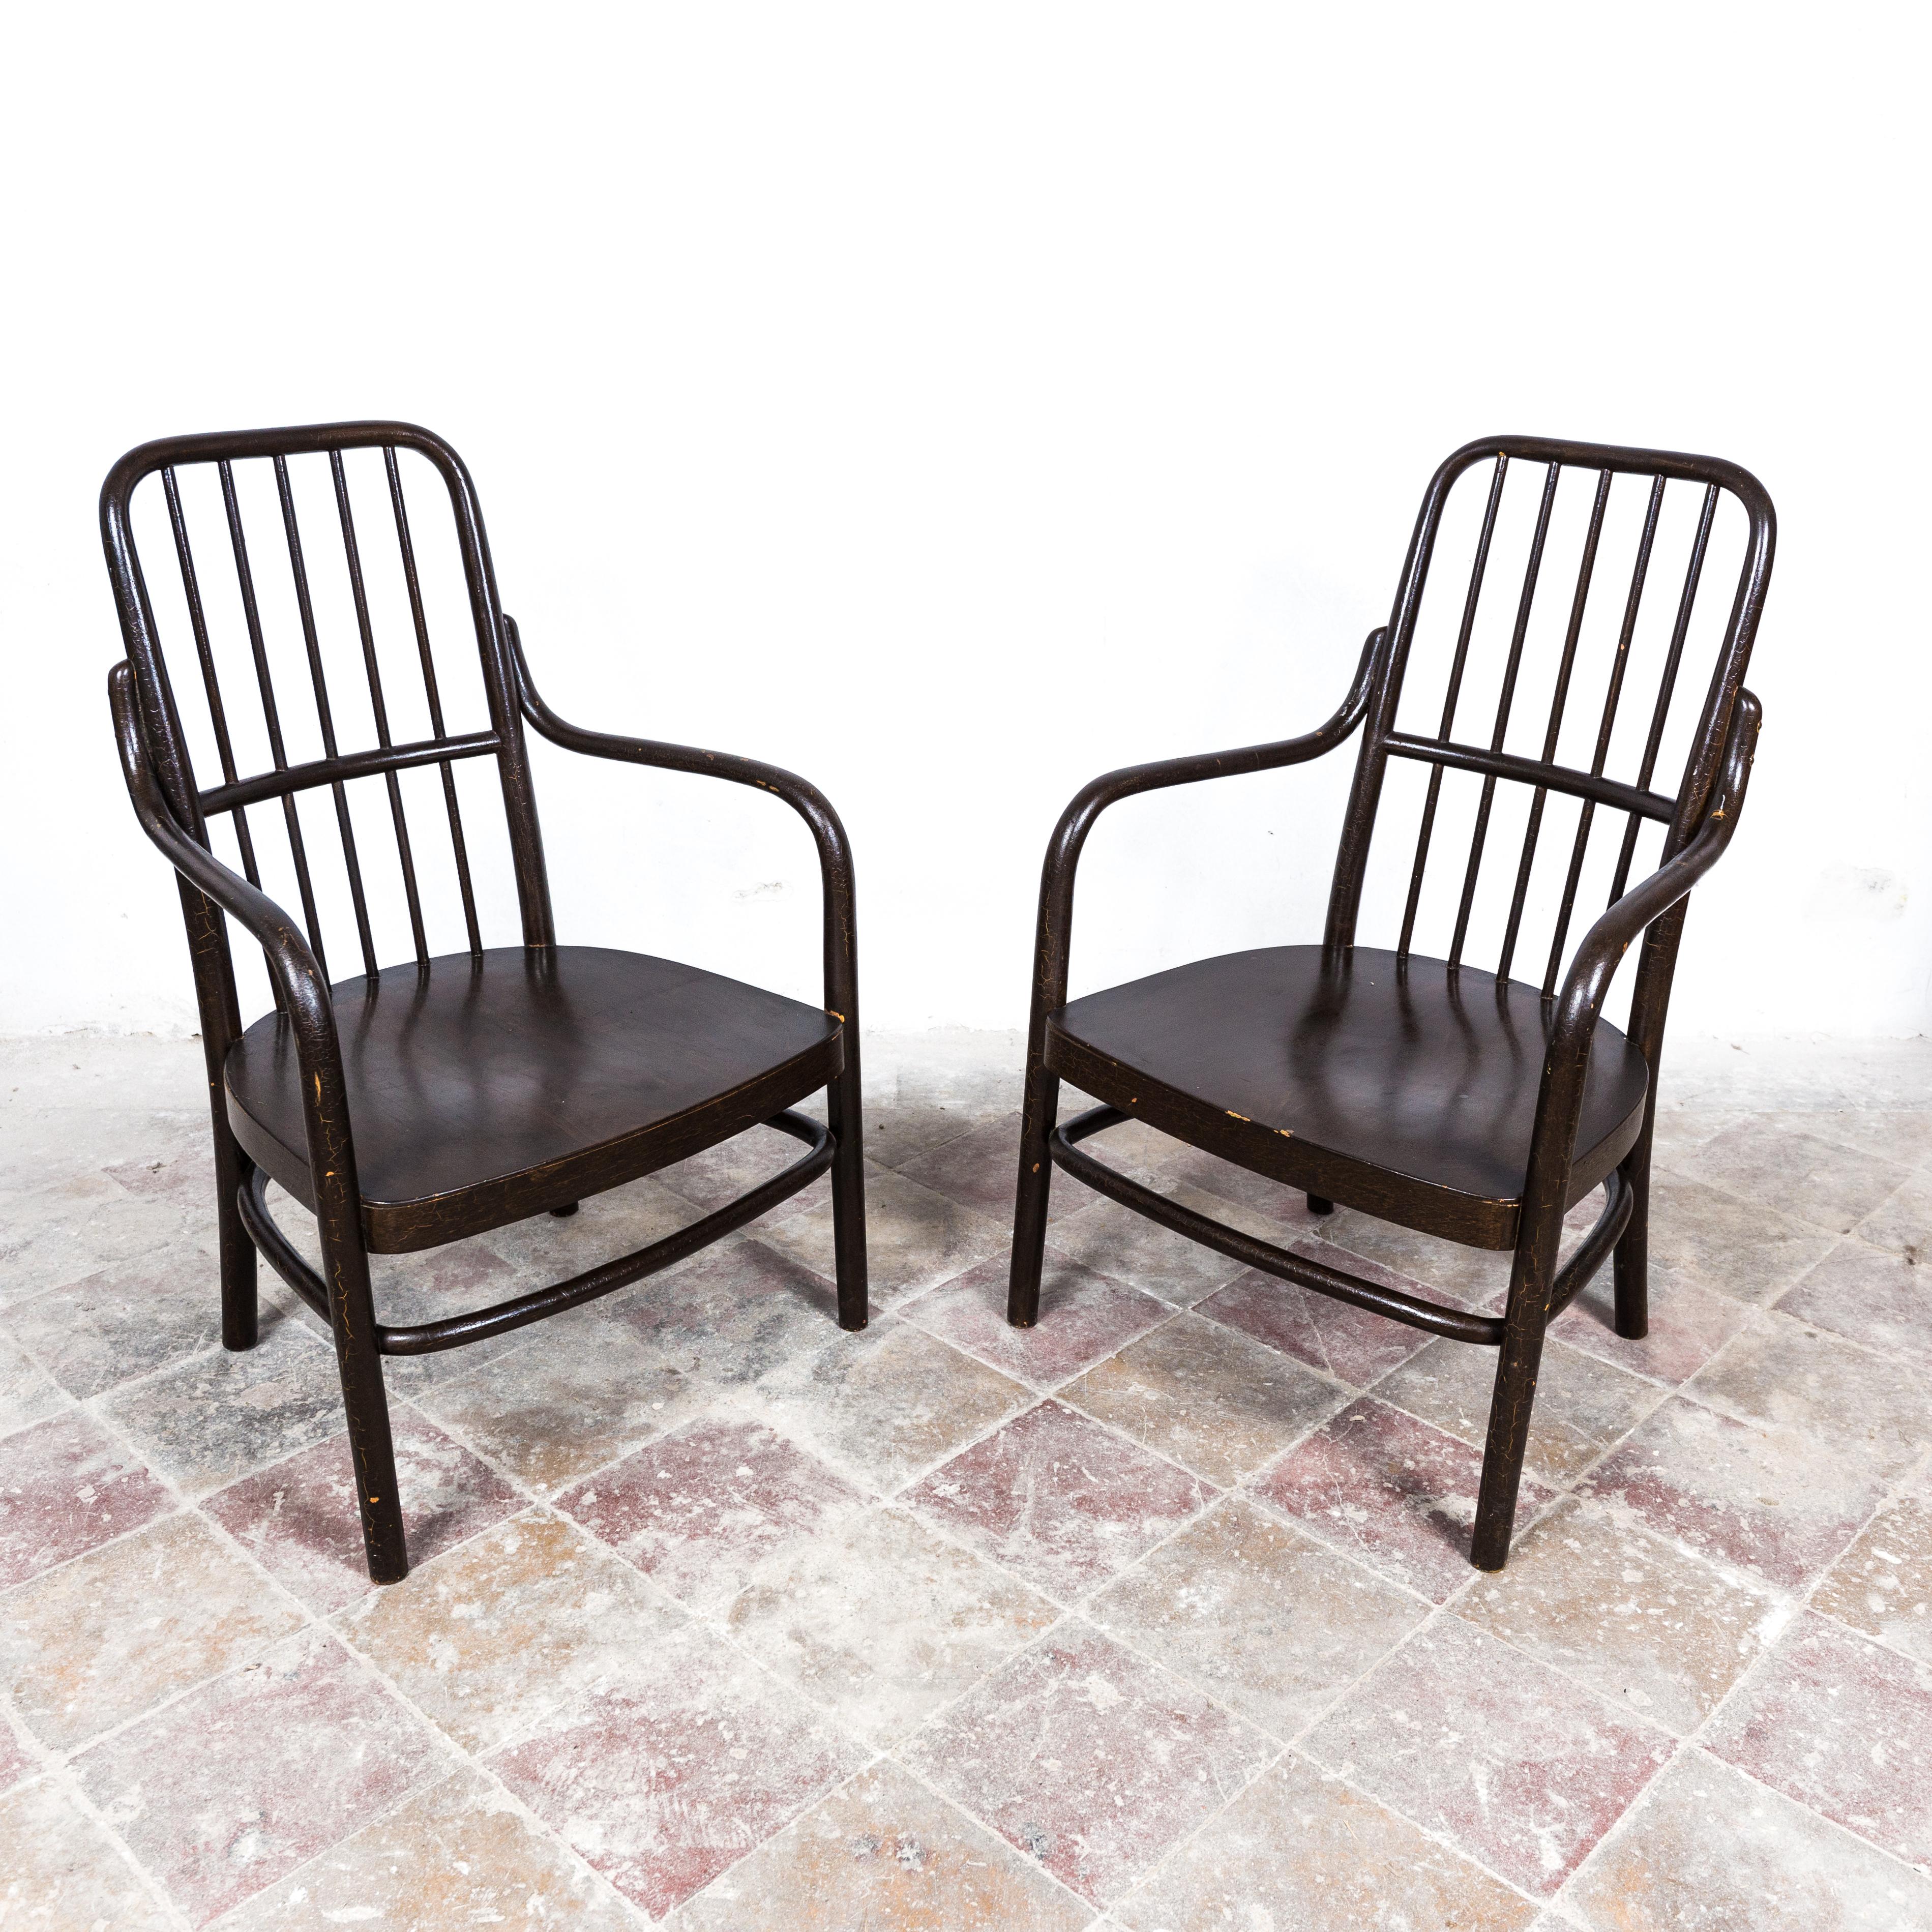 Bauhaus Josef Frank A 63/F Armchairs for Thonet, 1930s For Sale